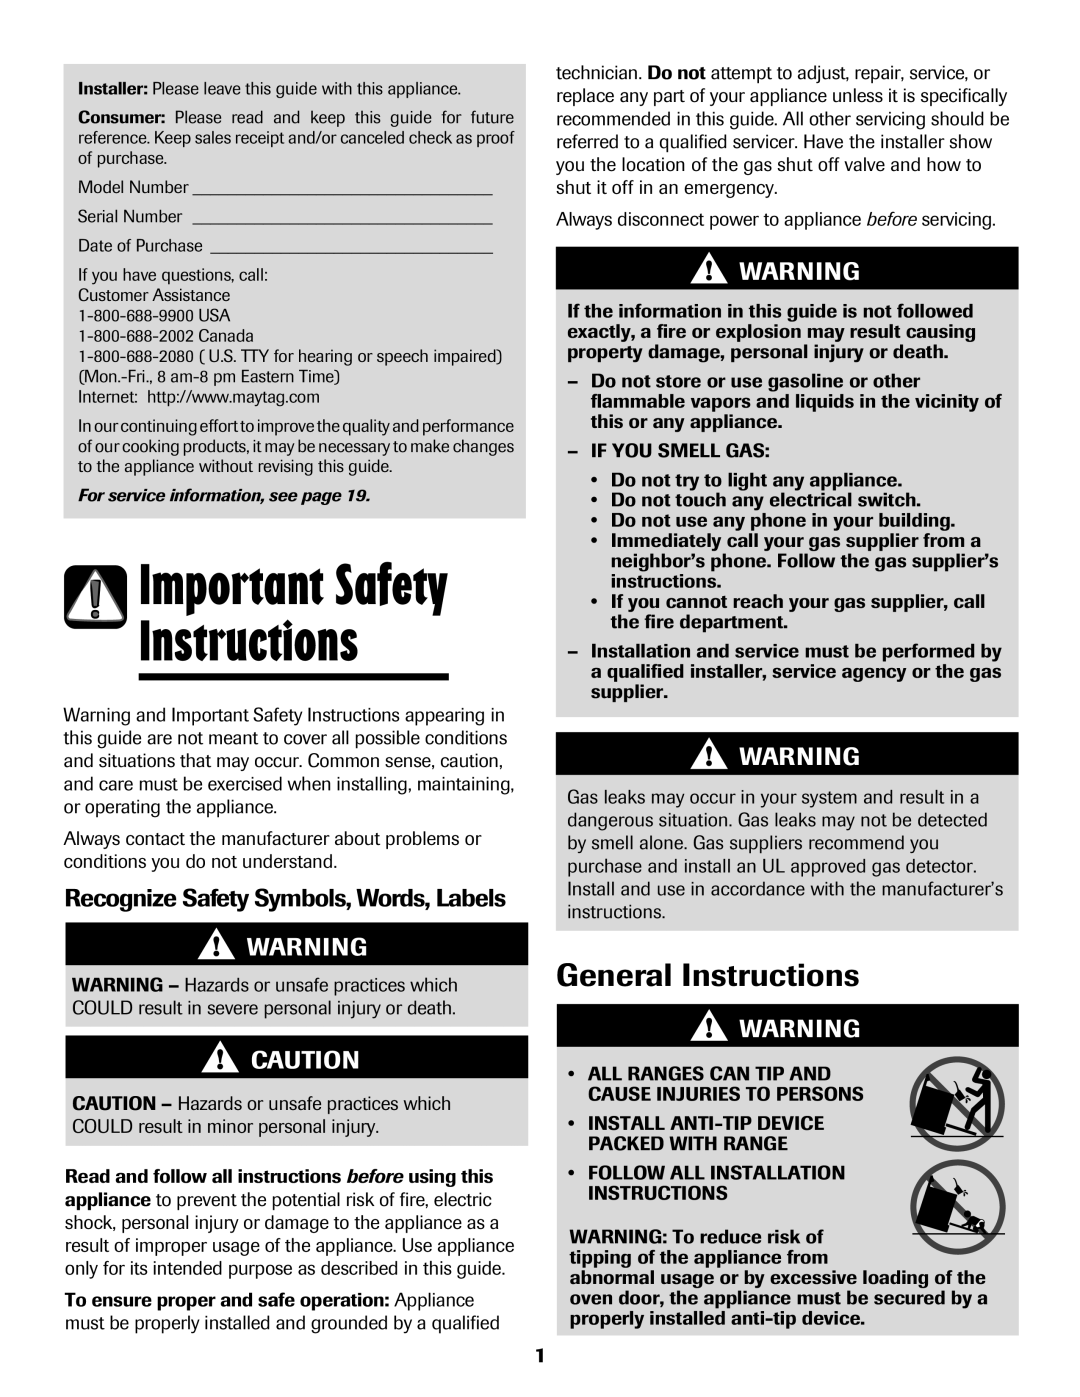 Magic Chef MGR5765QDW Important Safety, General Instructions, Recognize Safety Symbols, Words, Labels 